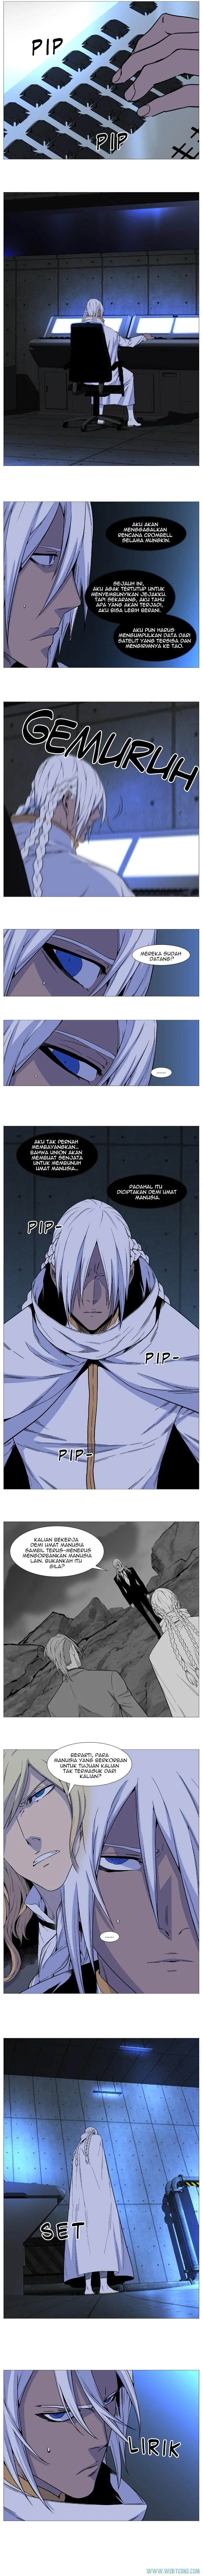 Noblesse Chapter 521 - 53